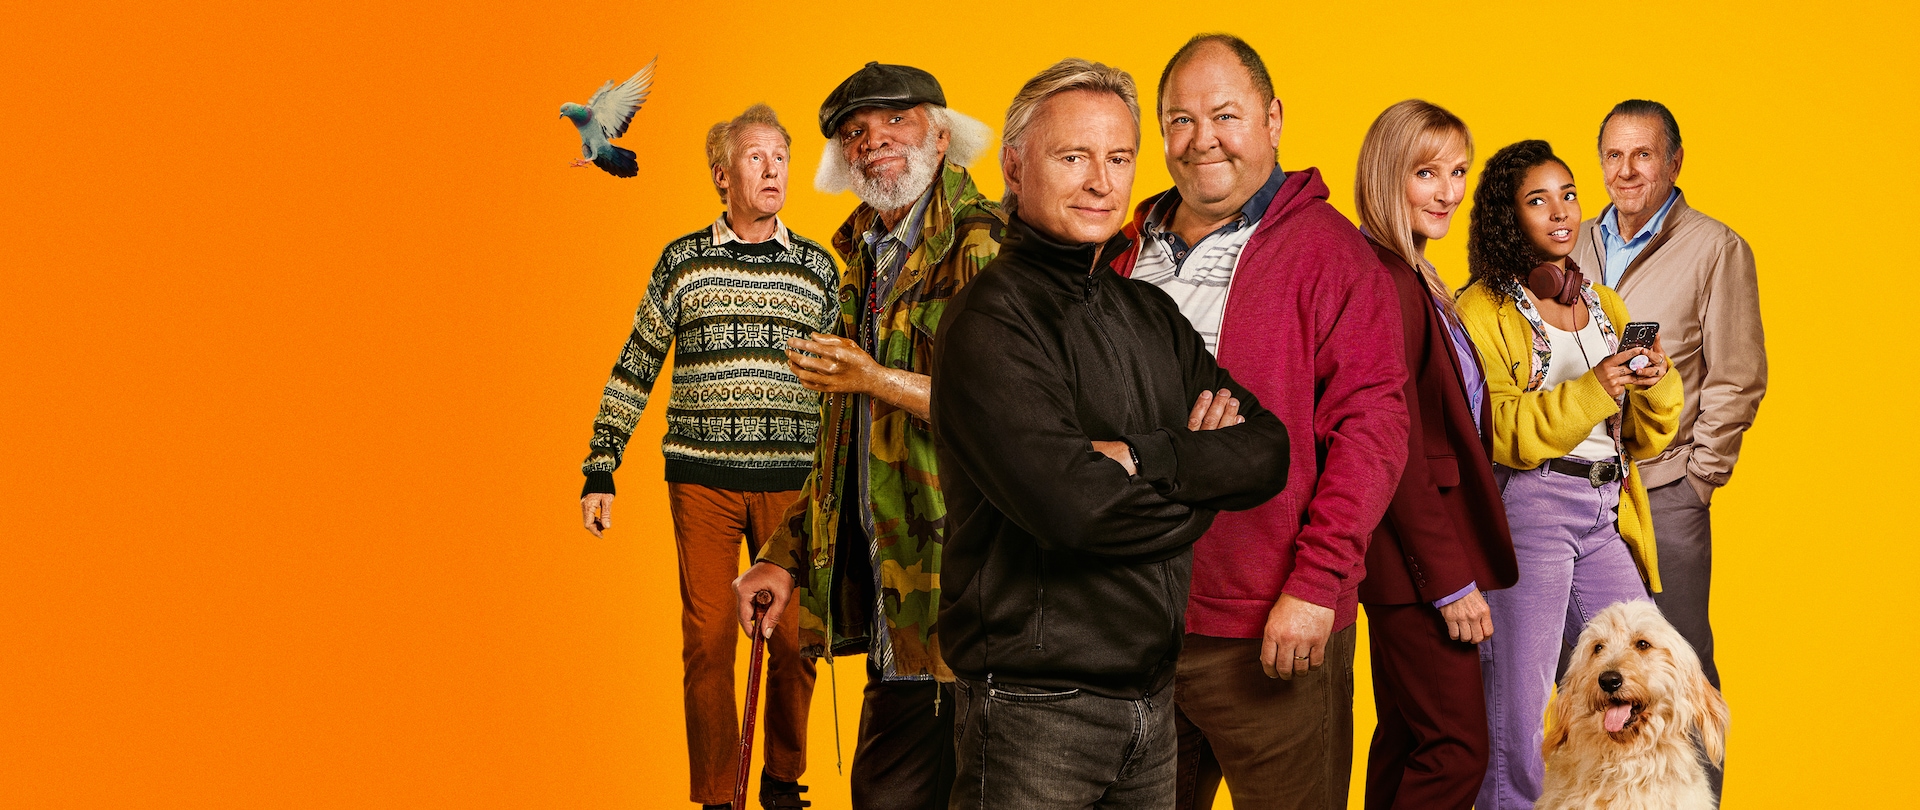 Cast of Full Monty in casual outfits for fall weather standing in front of an orange ombré background.